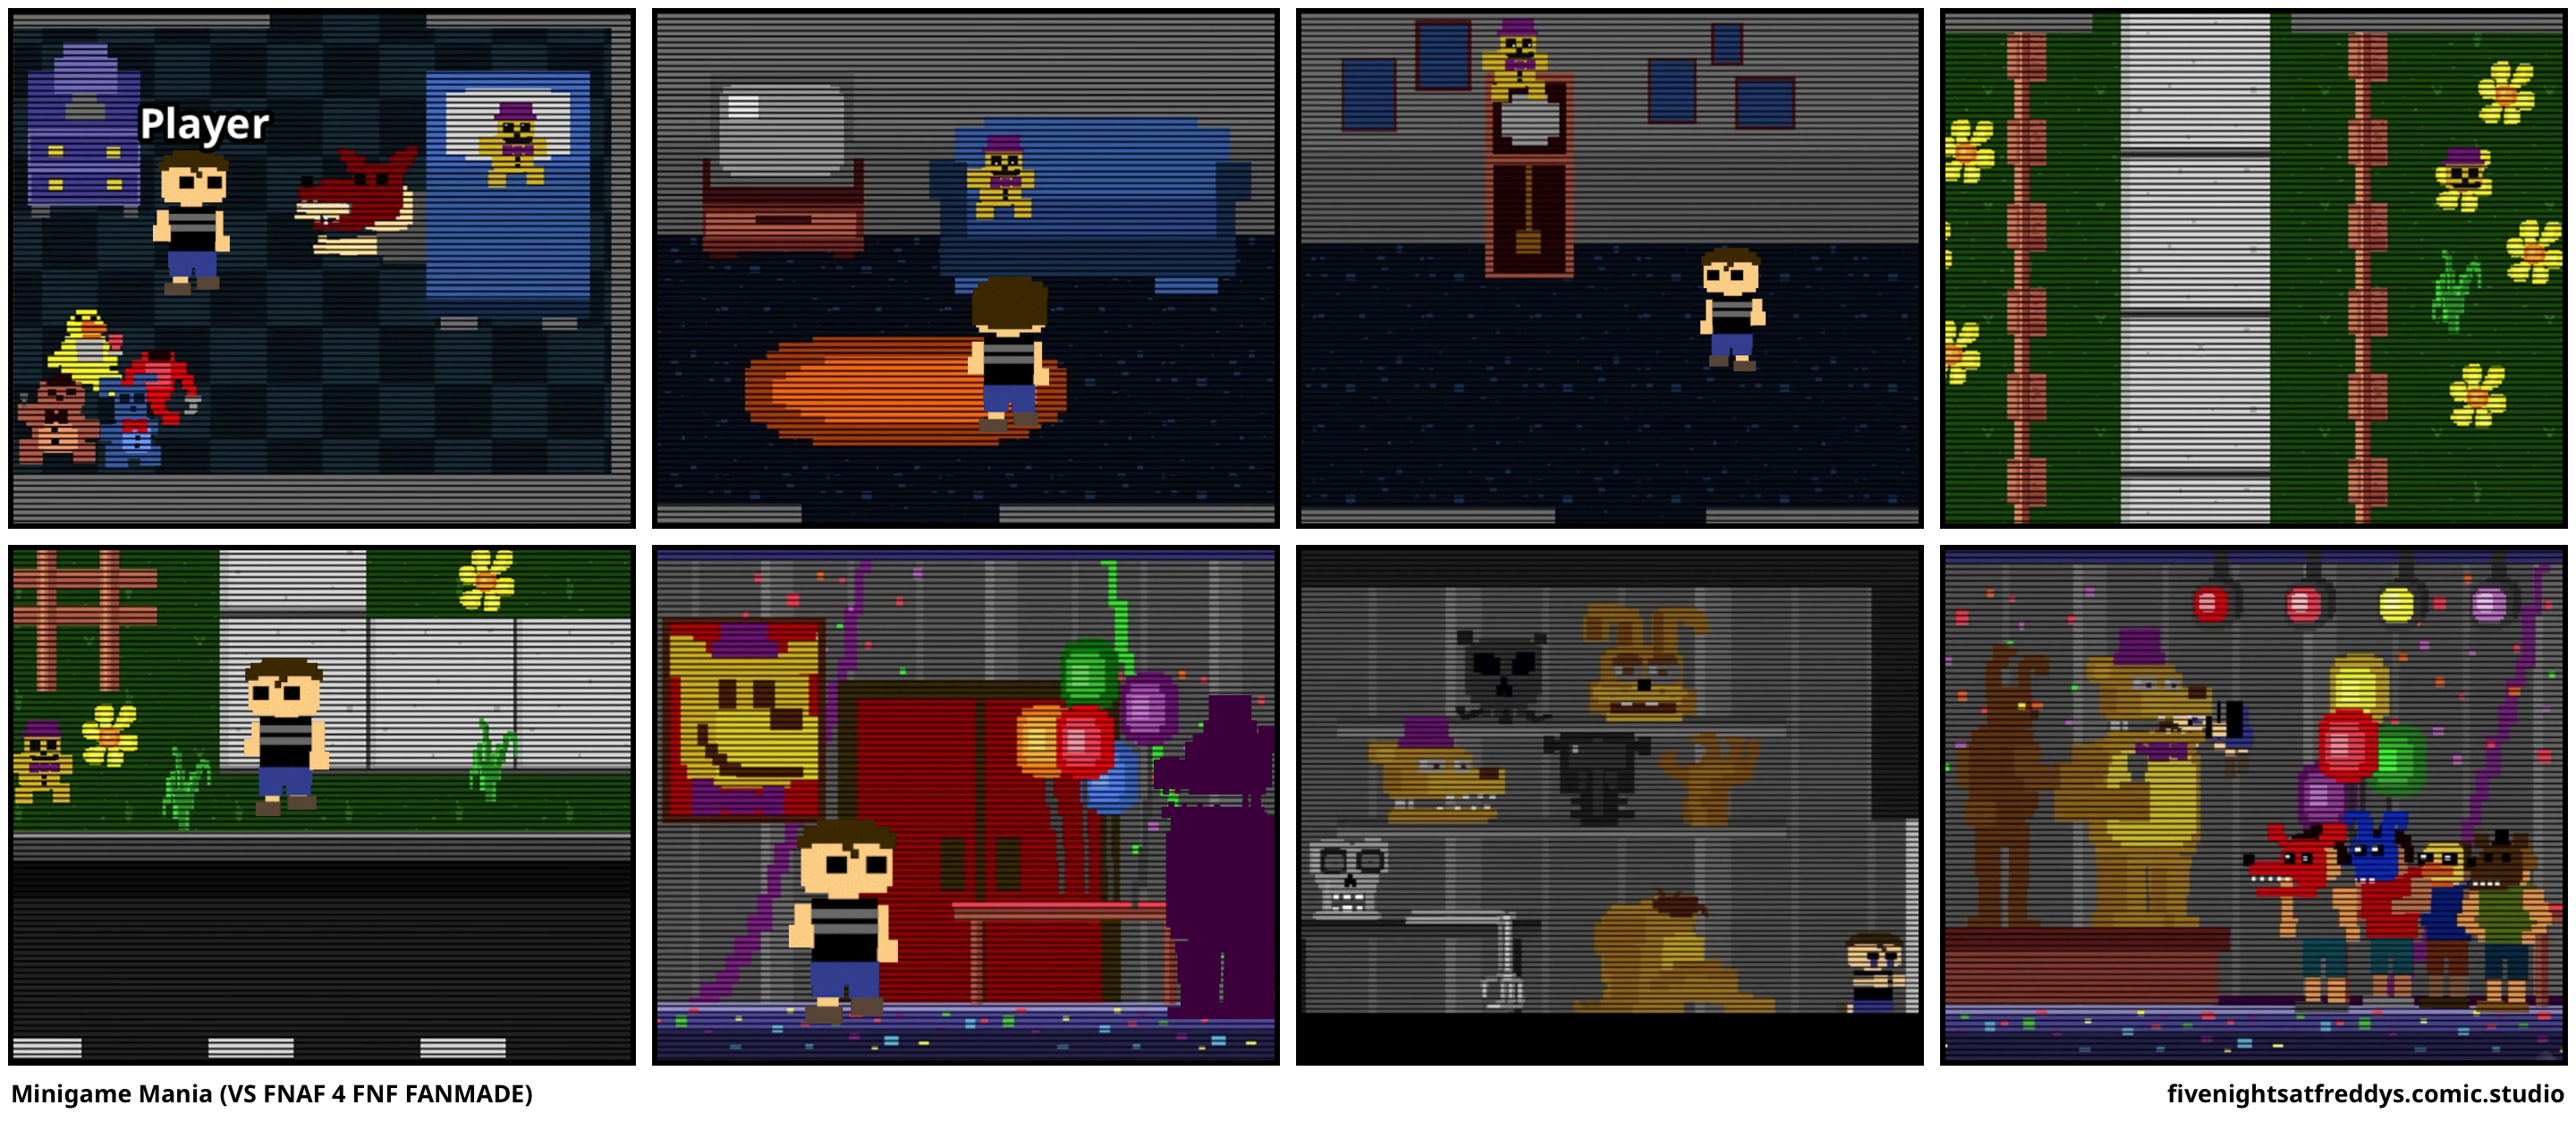 Minigame Mania (VS FNAF 4 FNF FANMADE)